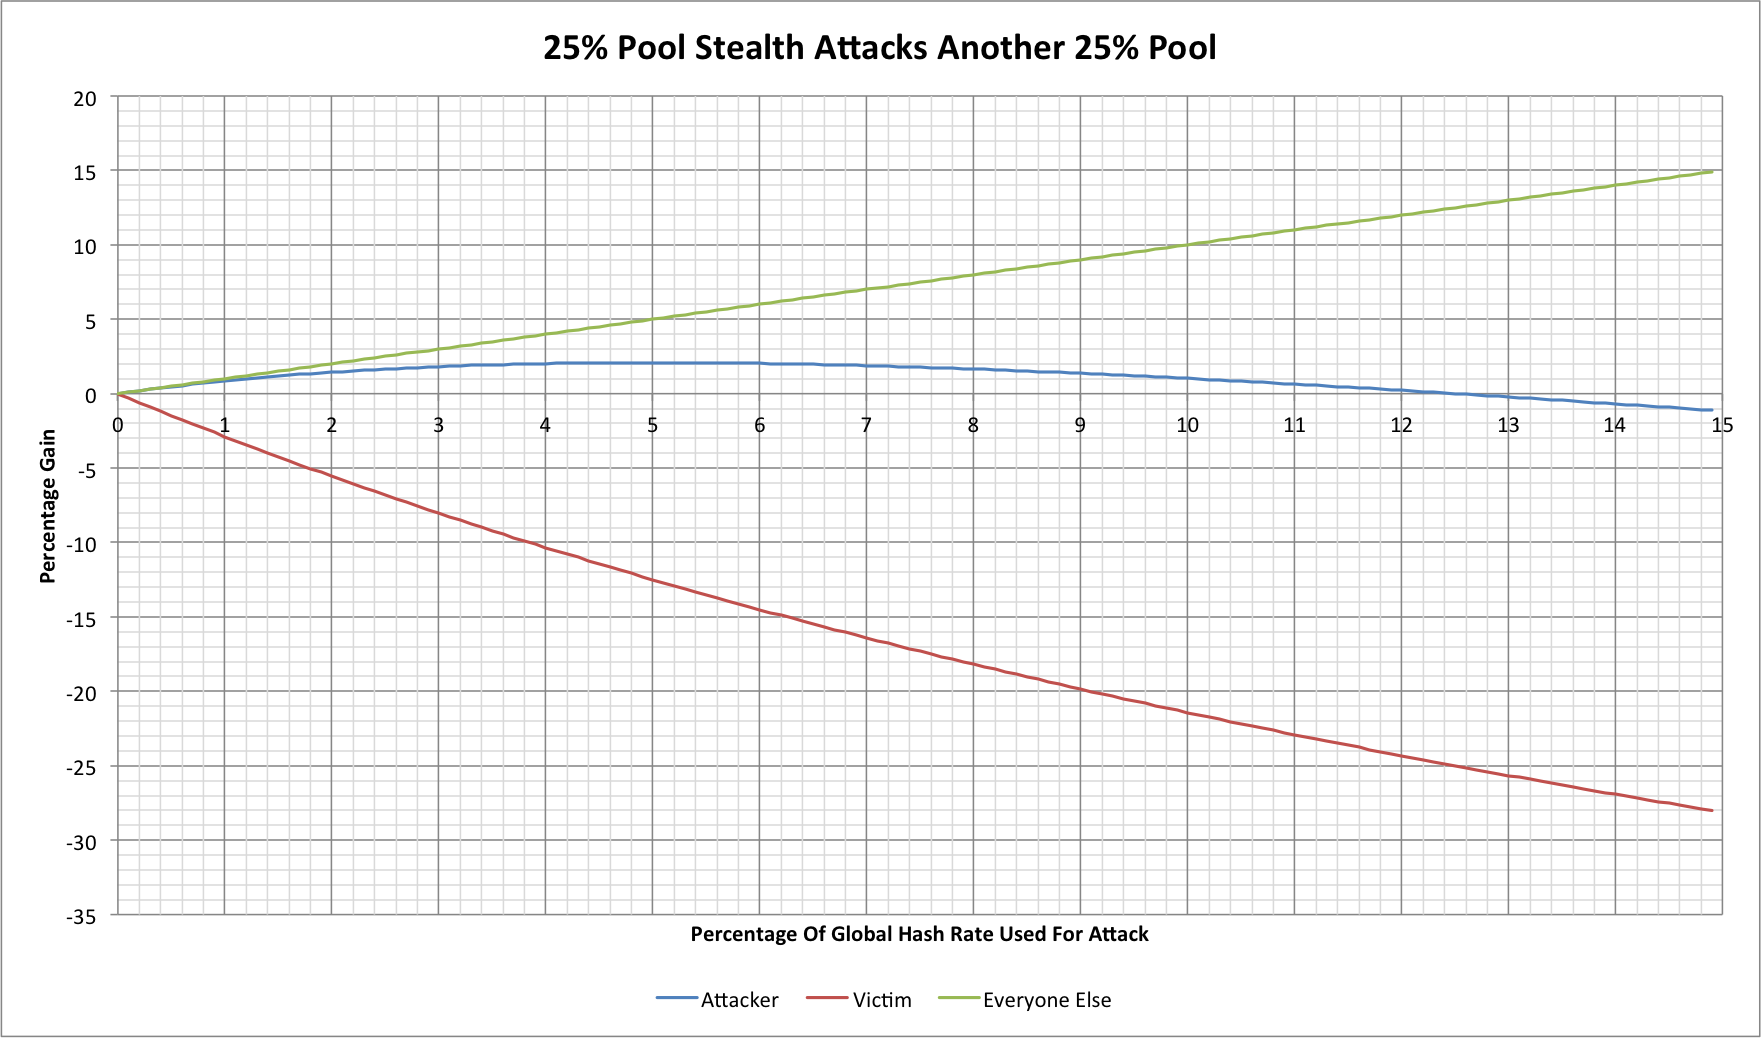 A 25% attacker stealth attacks a 25% open pool